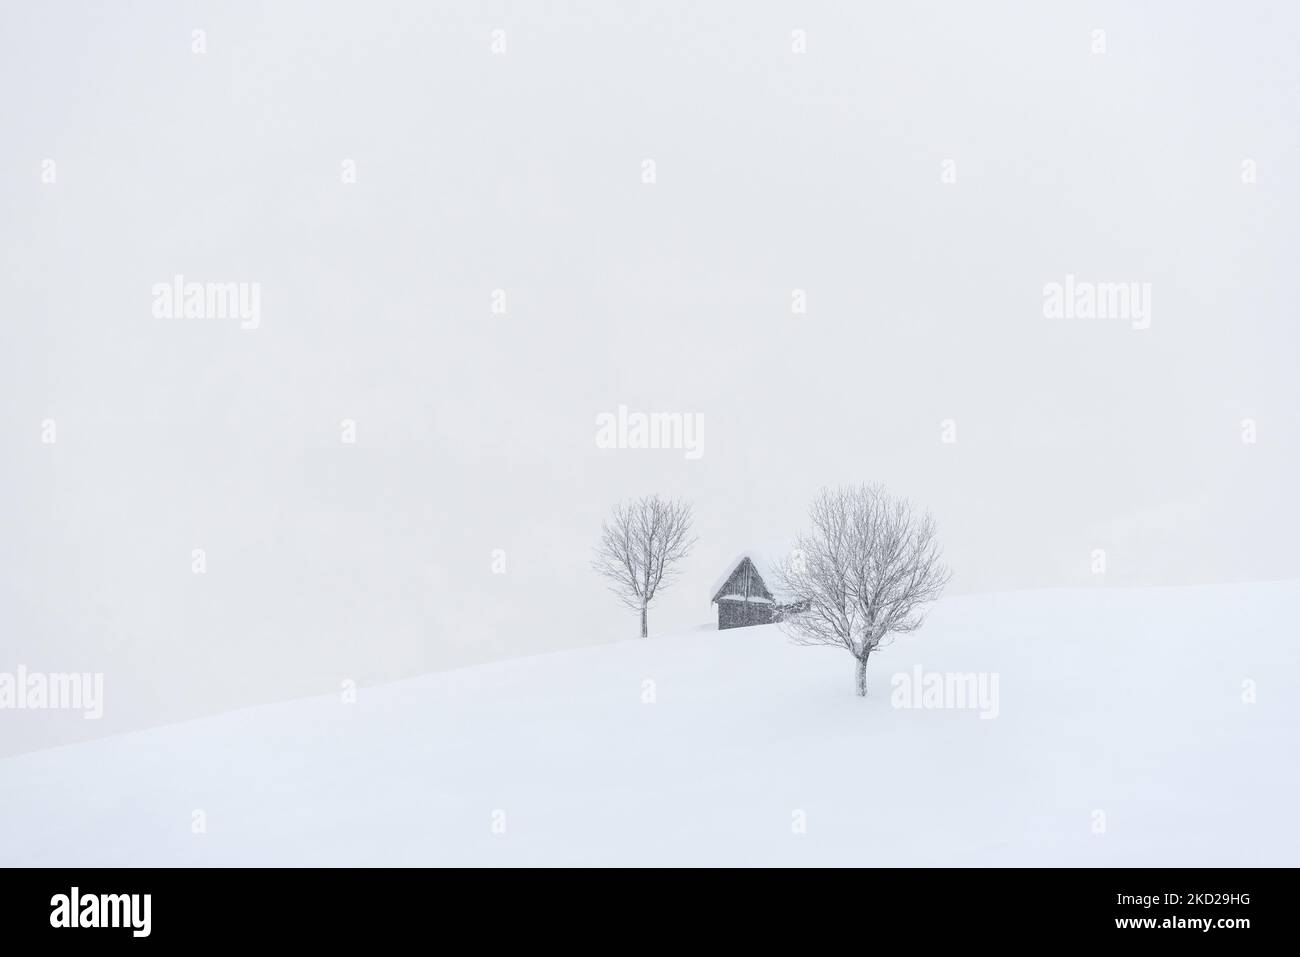 Minimalistic winter landscape with a lonely cabin in the snow Stock Photo